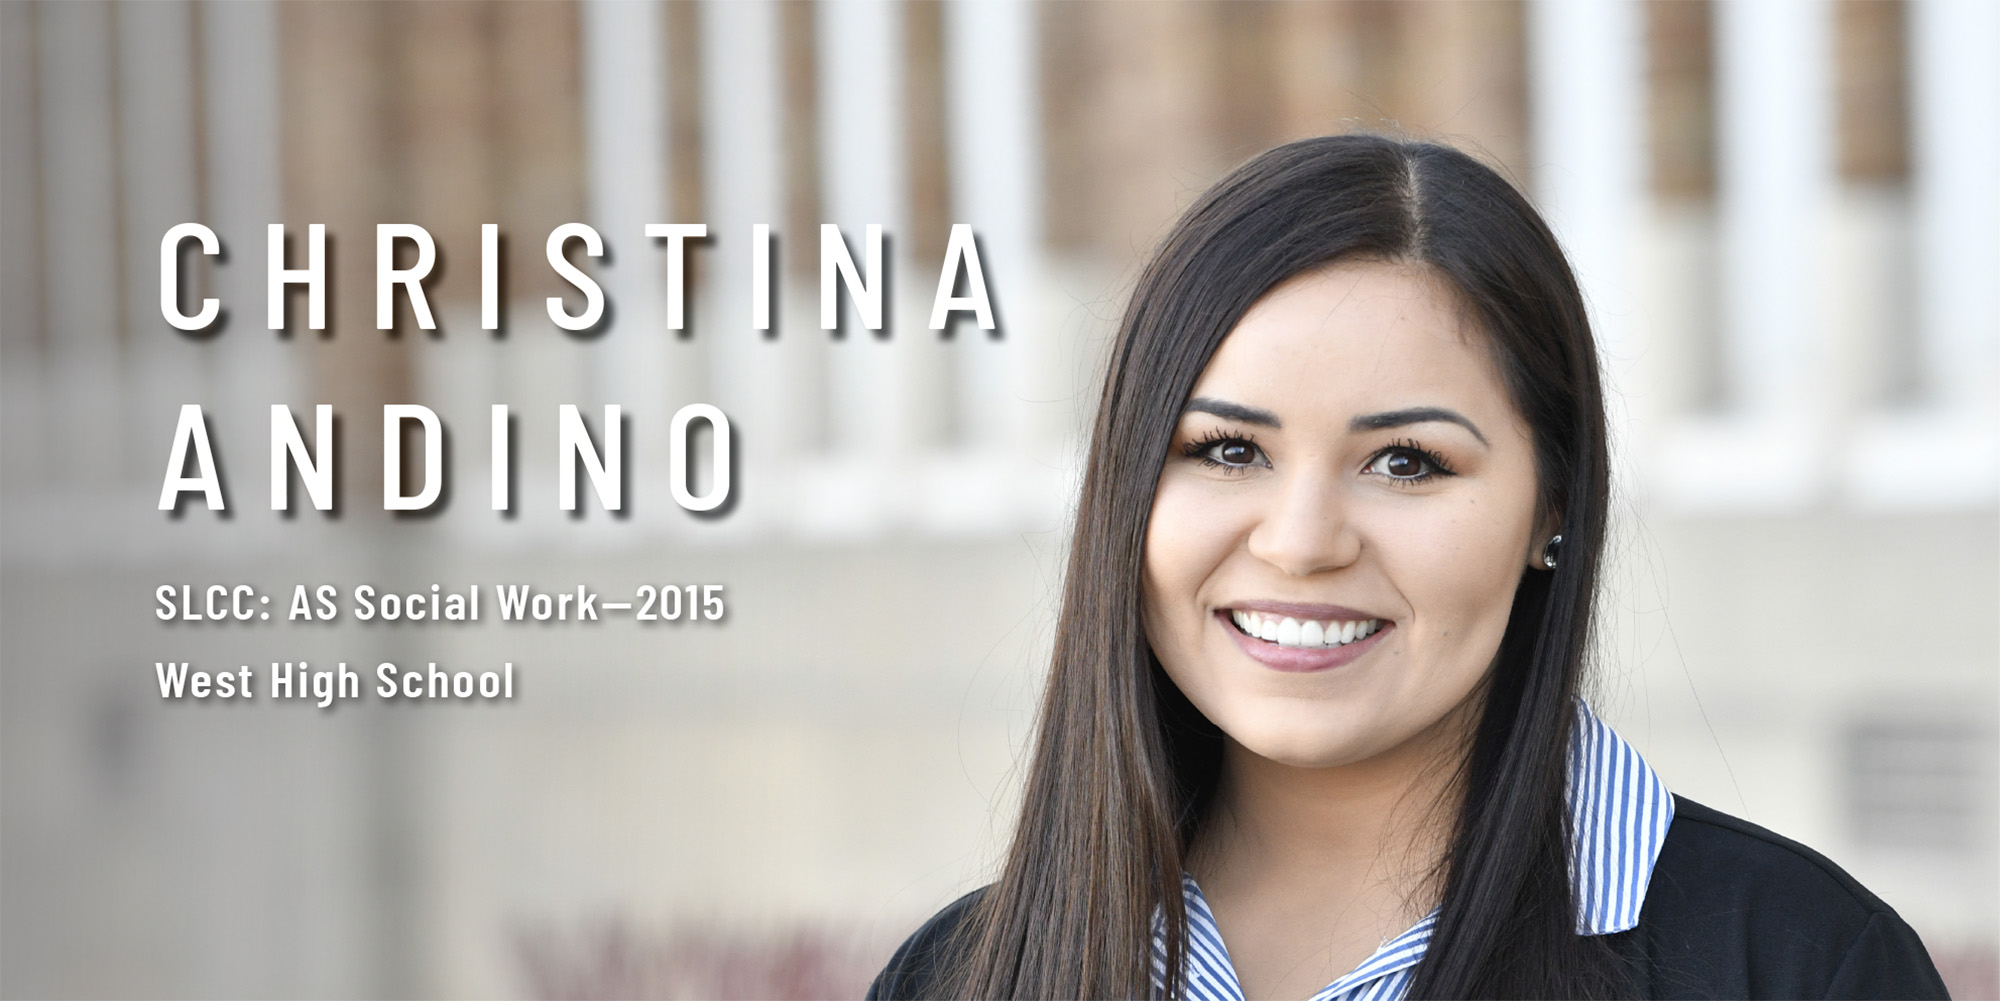 Christina Andino, SLCC AS Social Work in 2015, From West High School